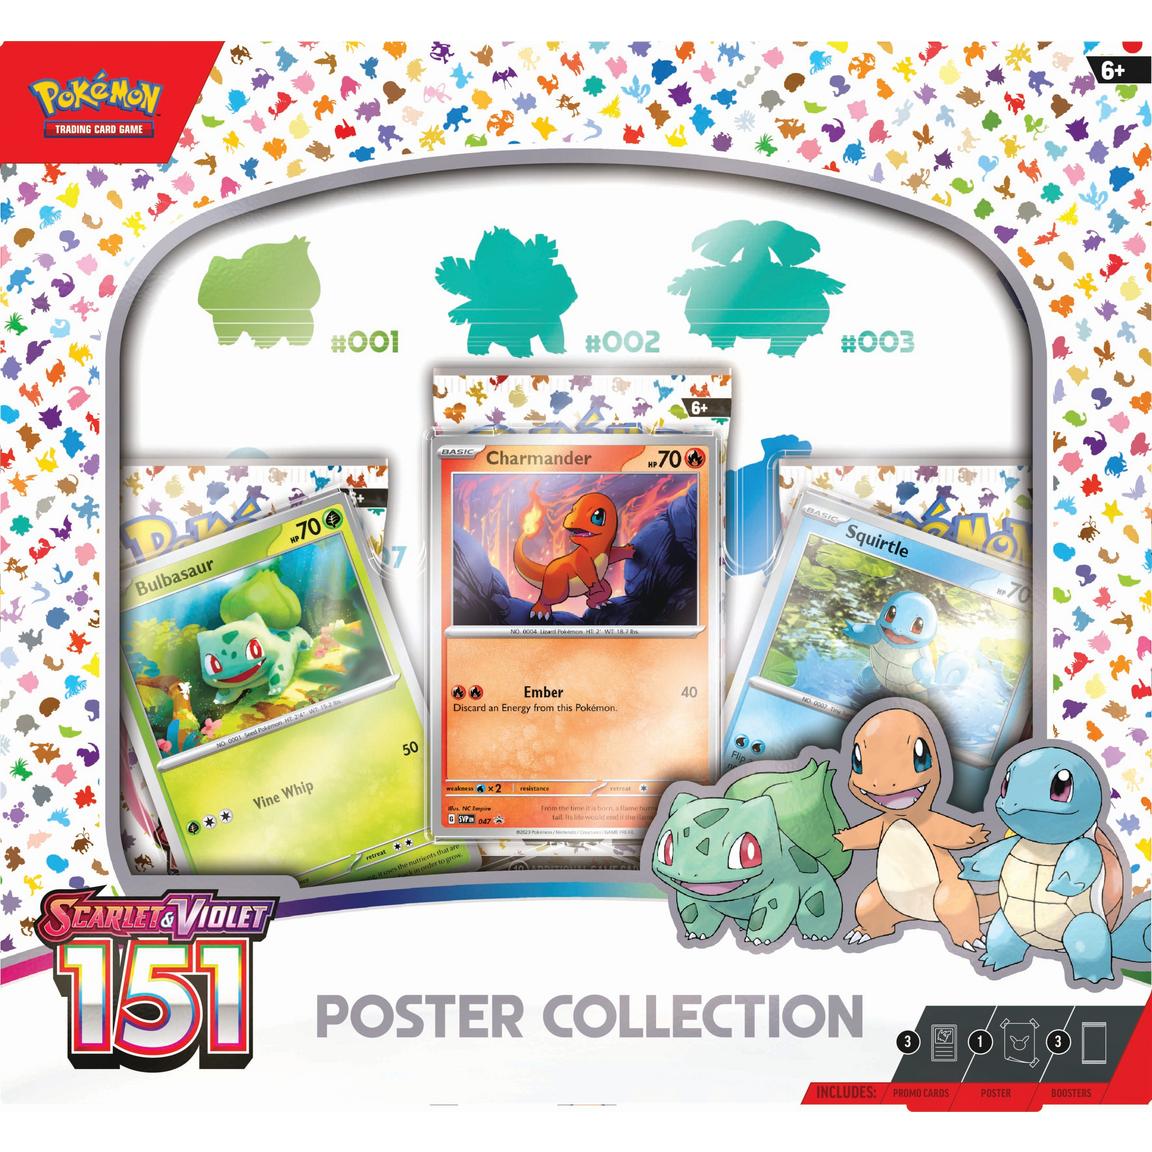 POKEMON SCARLET AND VIOLET 151 POSTER COLLECTION